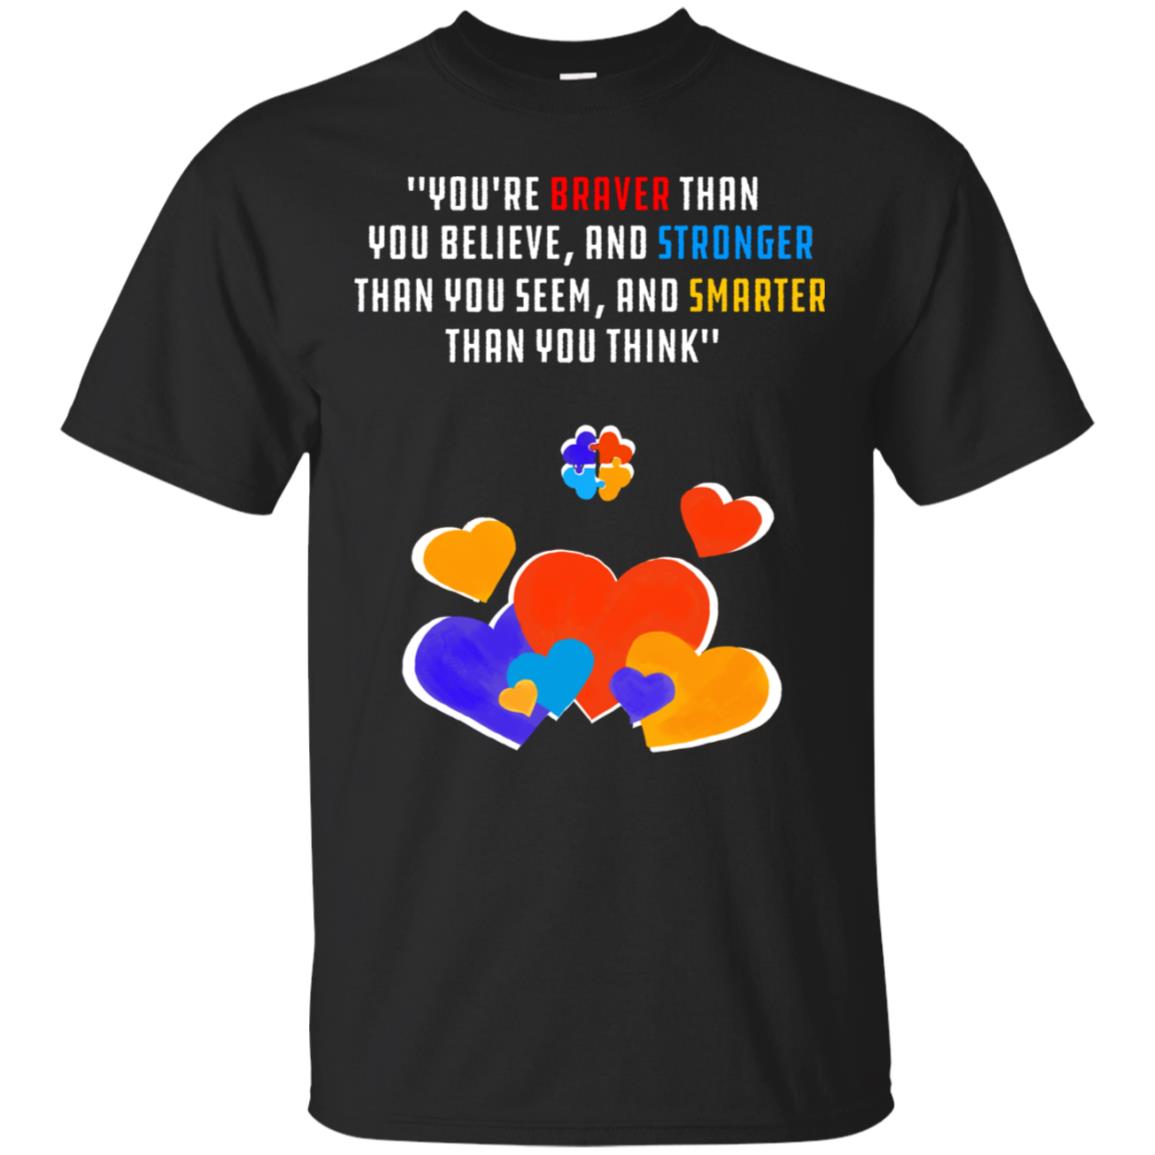 You Are Braver Than You Believe And Stronger Than You Seem And Smarter Than You Think Autism ShirtG200 Gildan Ultra Cotton T-Shirt